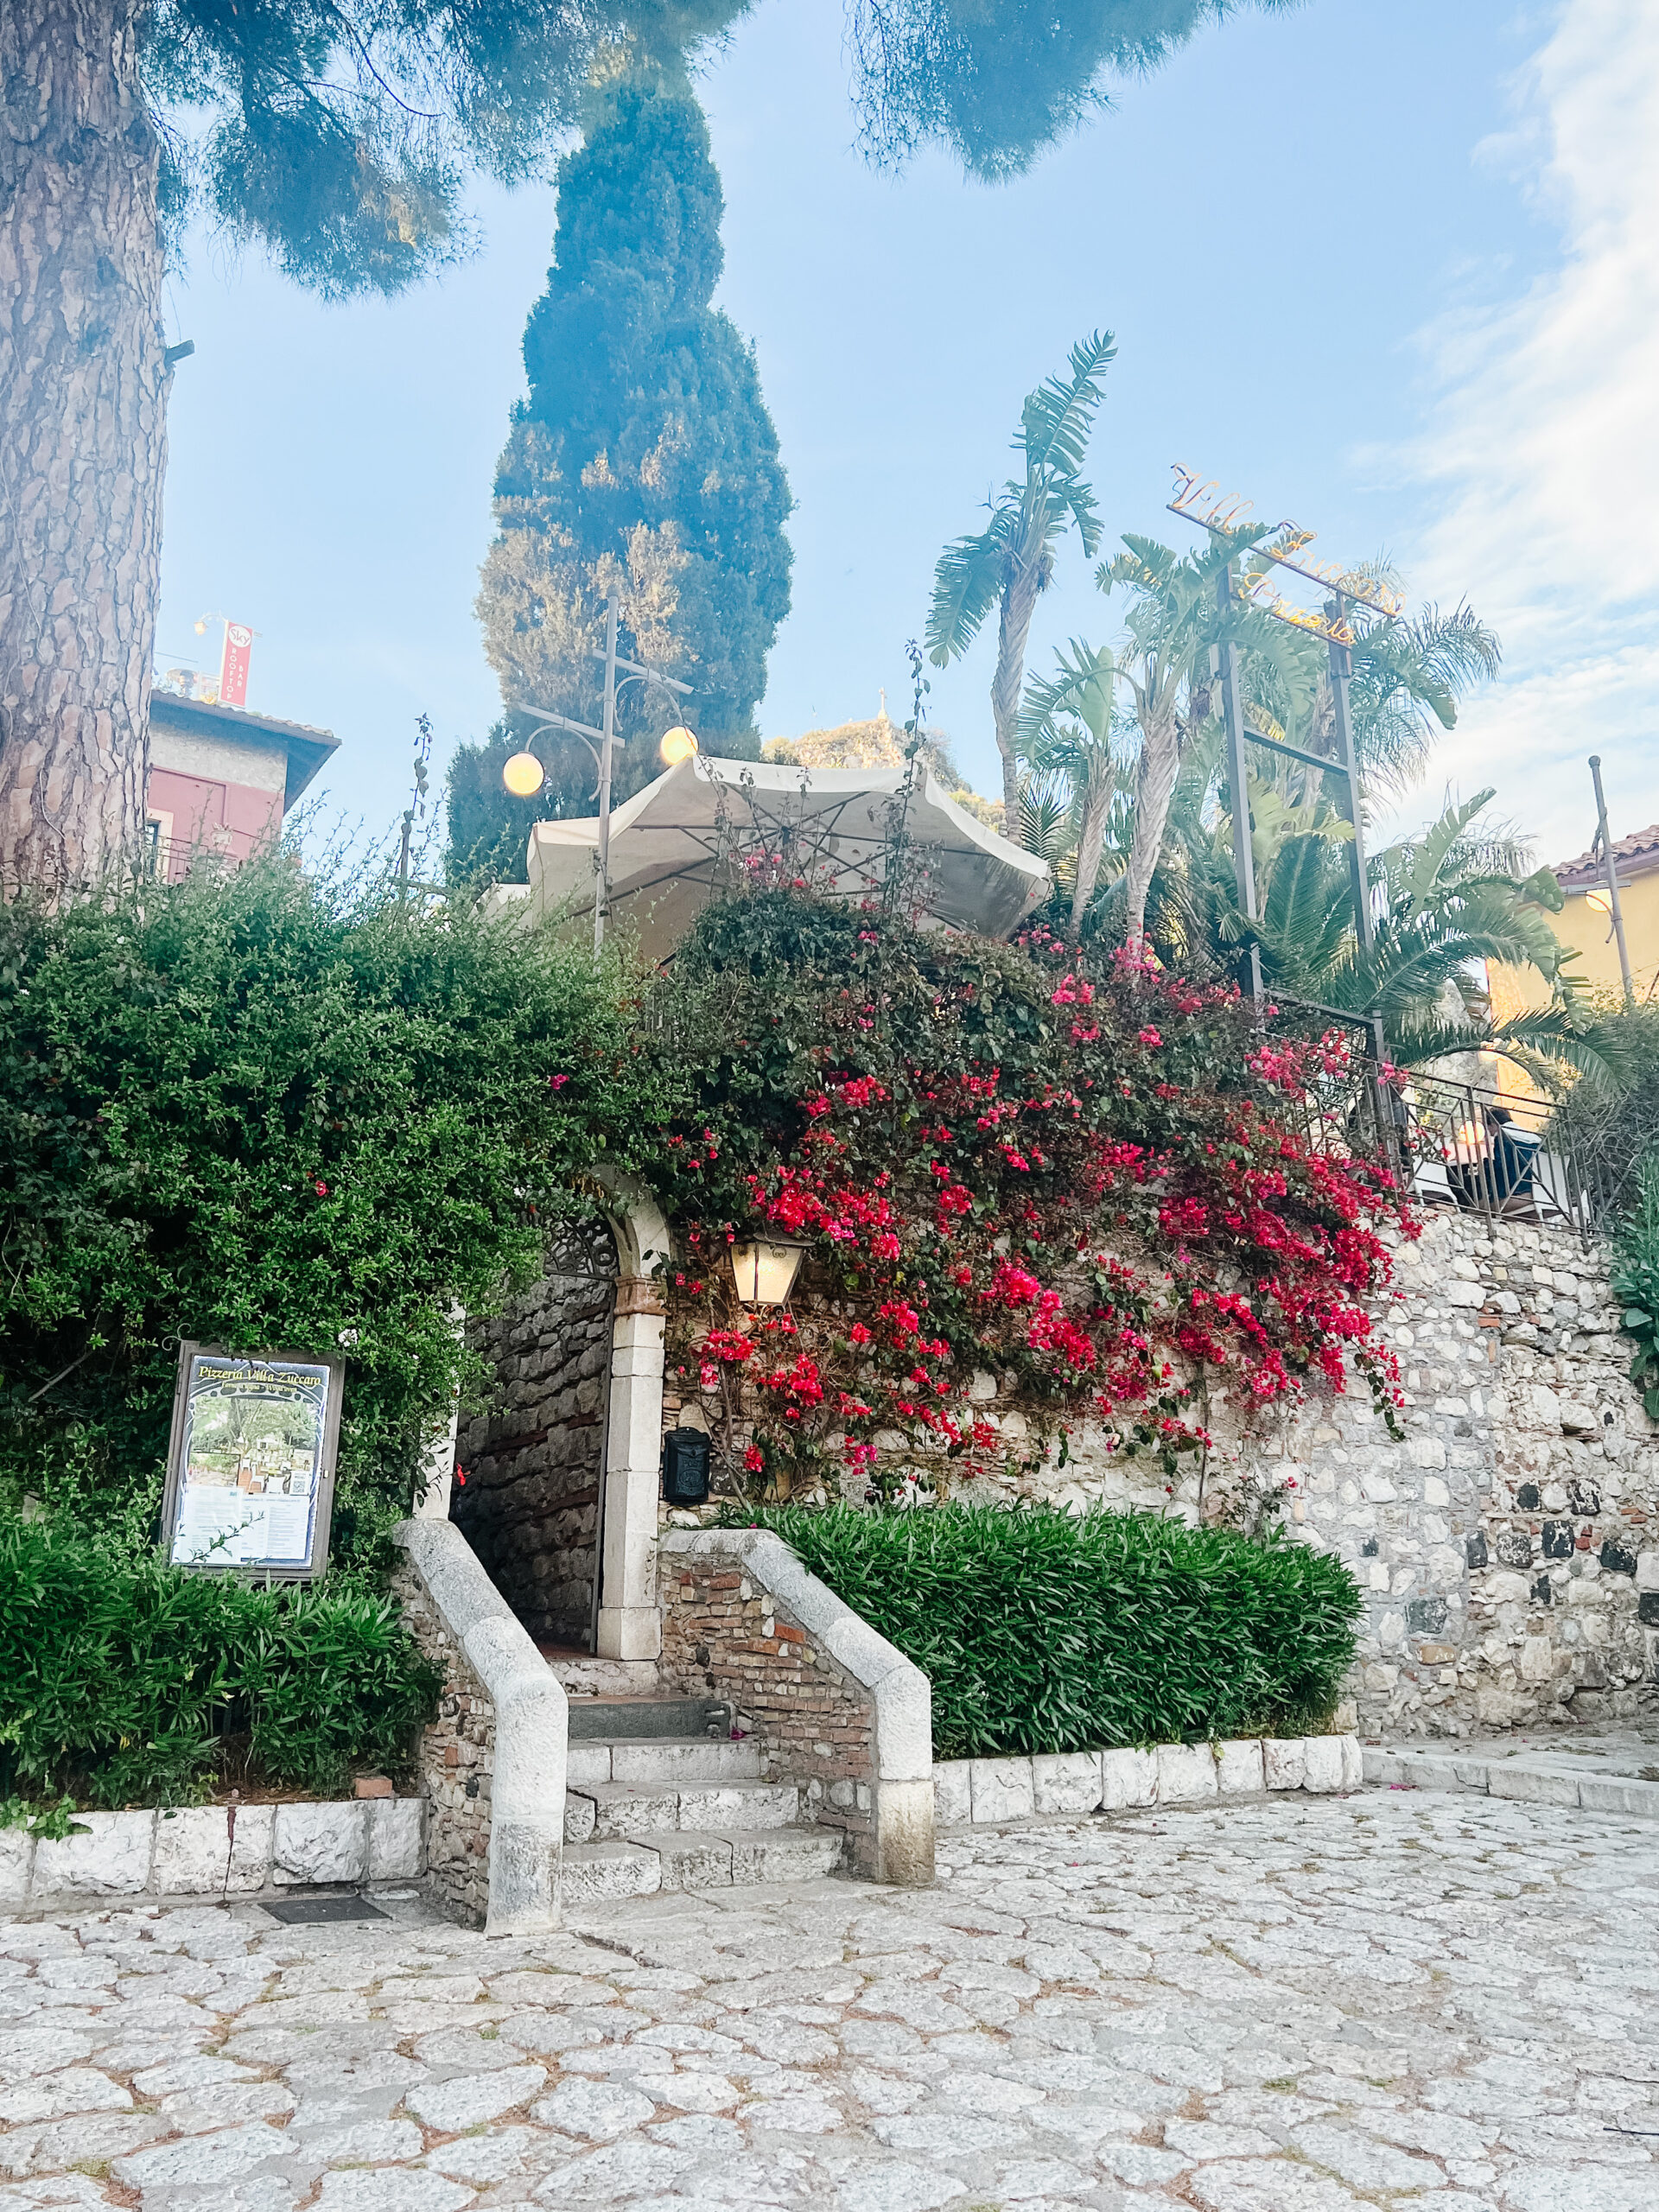 Villa Zucharo Pizzeria Taormina Sicily entrance with florals and steps, 10 day Italy Itinerary